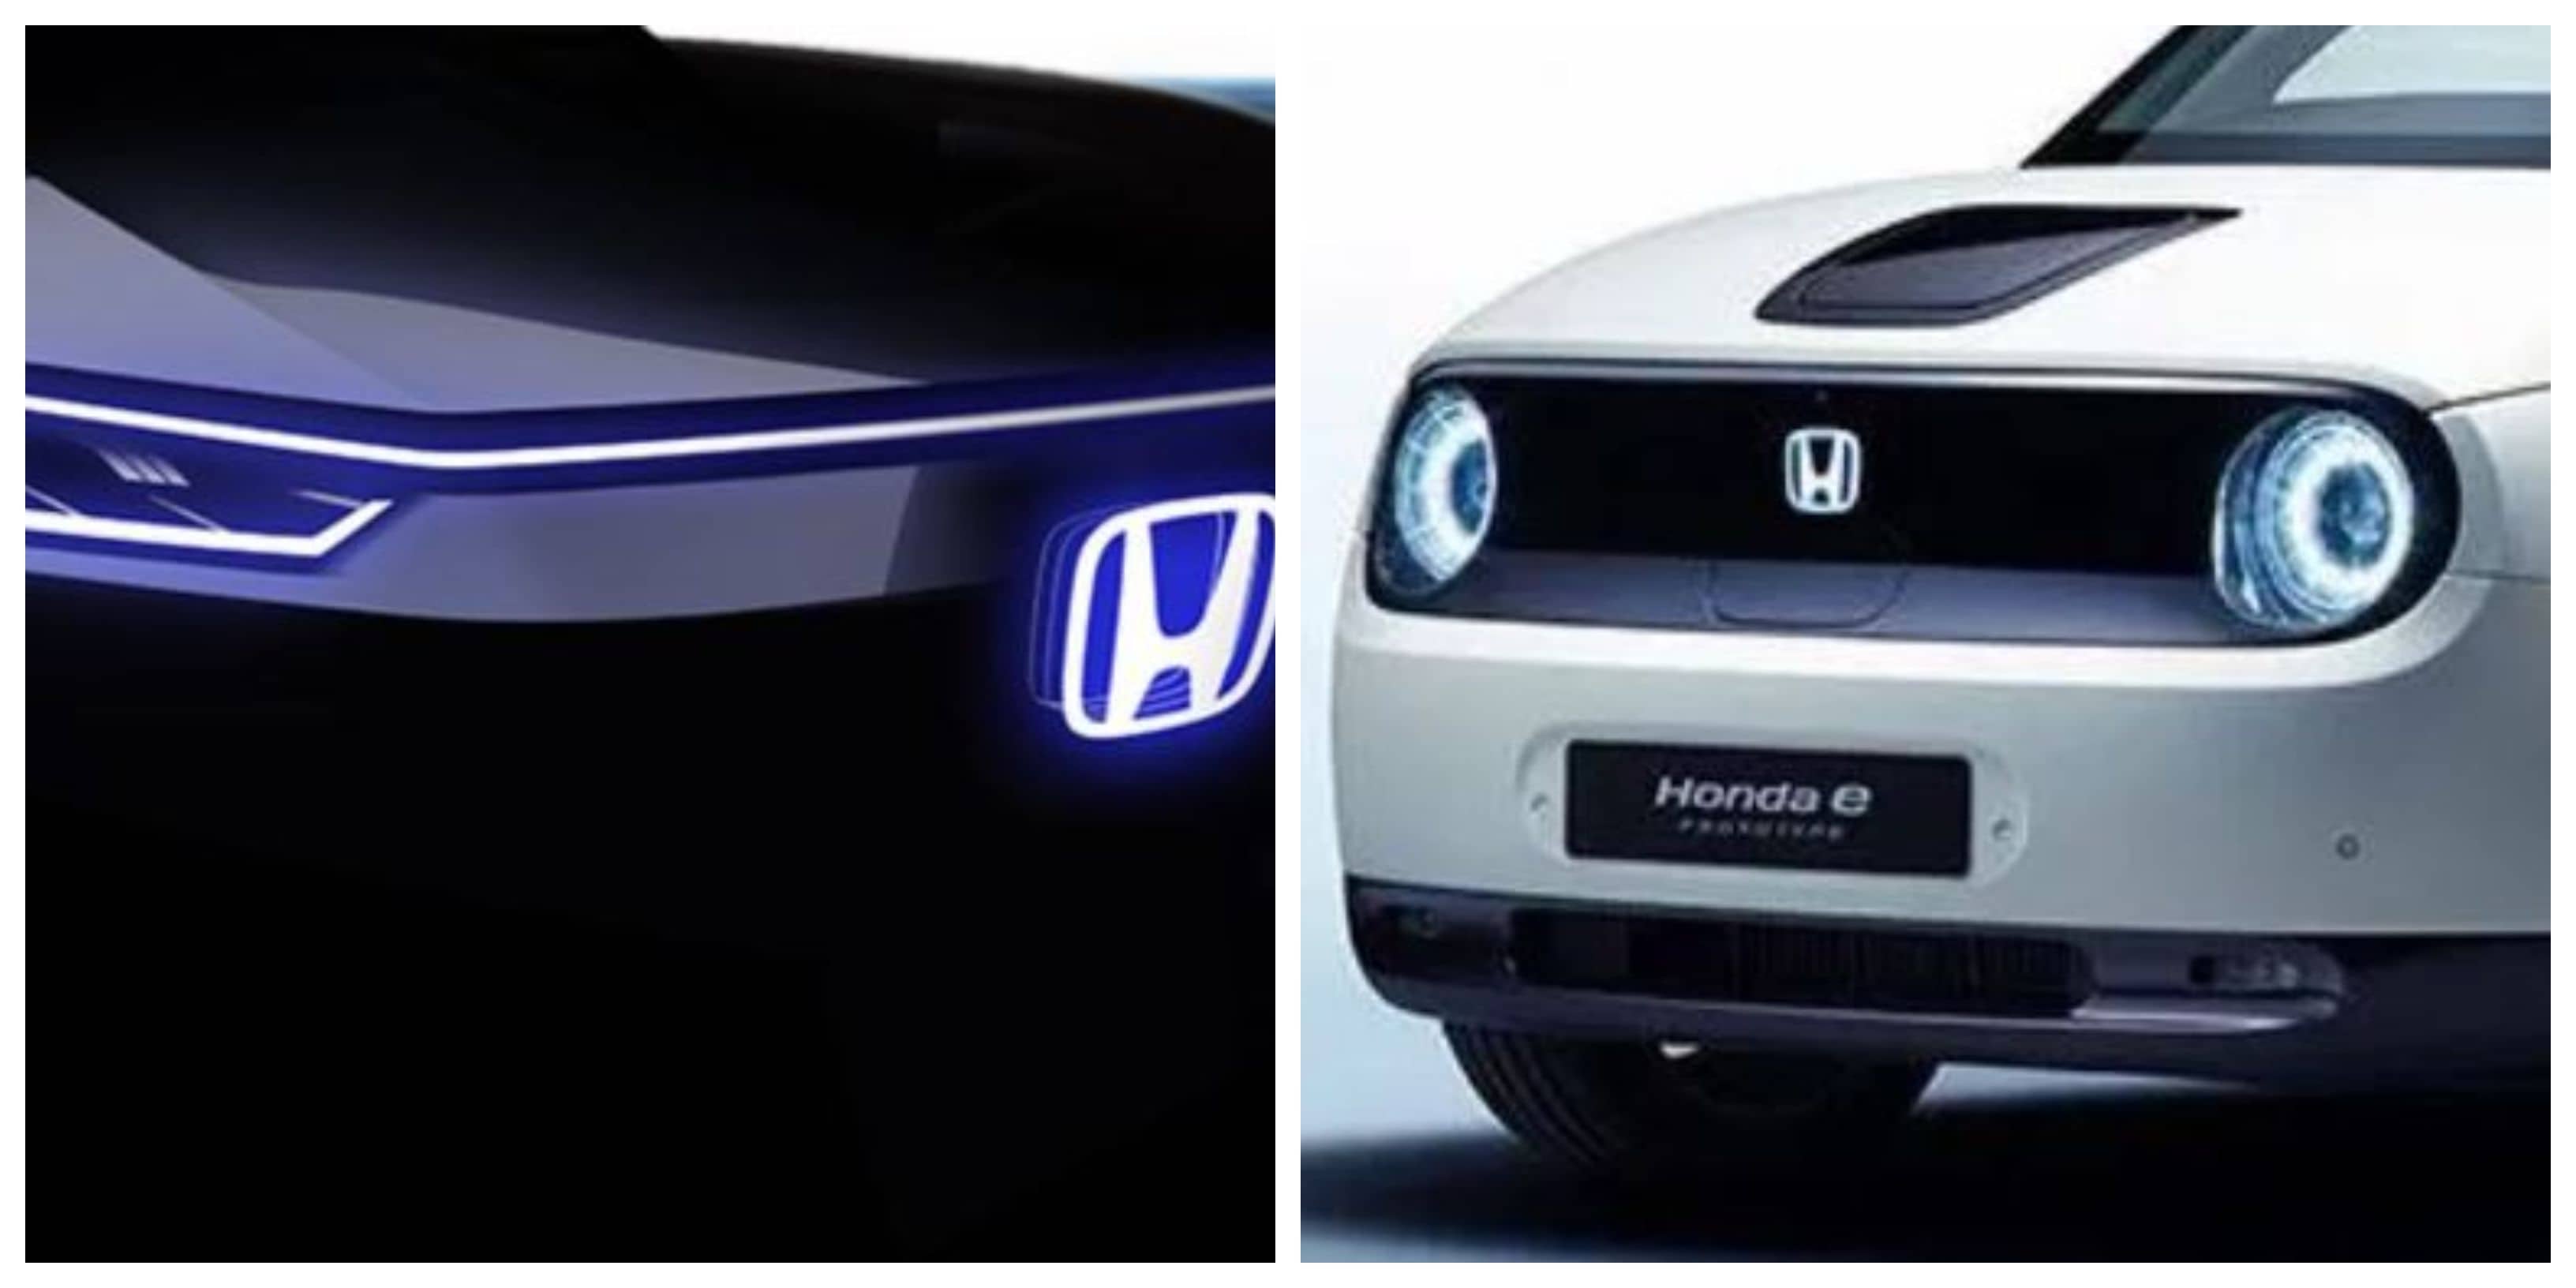 While Honda e (right) has a retro visual appeal which is more rounded, the teaser image of Honda's new EV showcases an emphasis on an angular, athletic design language.